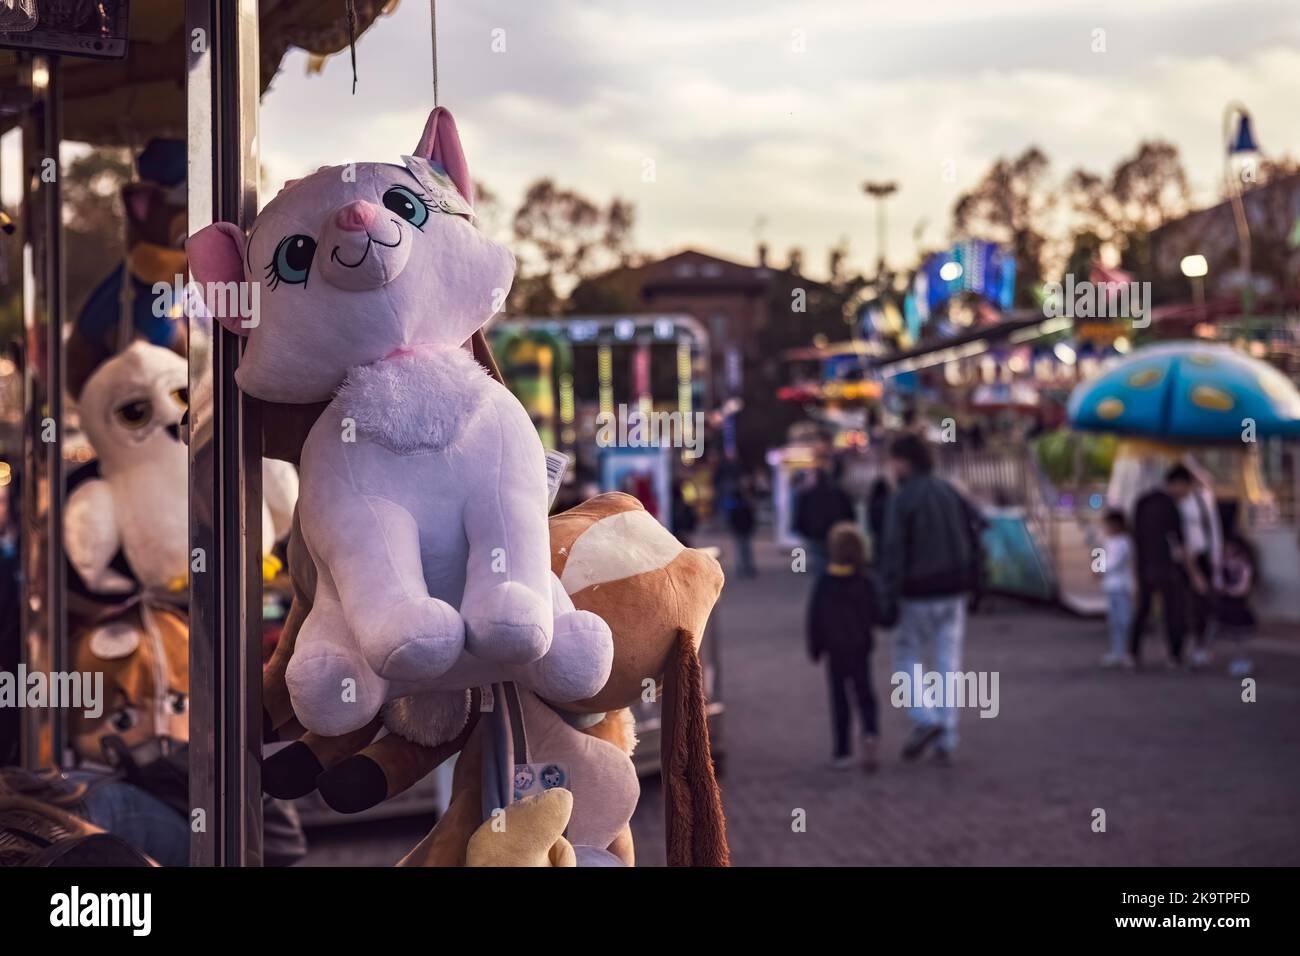 https://c8.alamy.com/comp/2K9TPFD/rovigo-italy-25-october-2022-detail-of-peluches-at-the-funfair-stuffed-animals-at-the-funfair-teddy-bears-and-cuddly-animal-prizes-in-a-stall-on-a-2K9TPFD.jpg